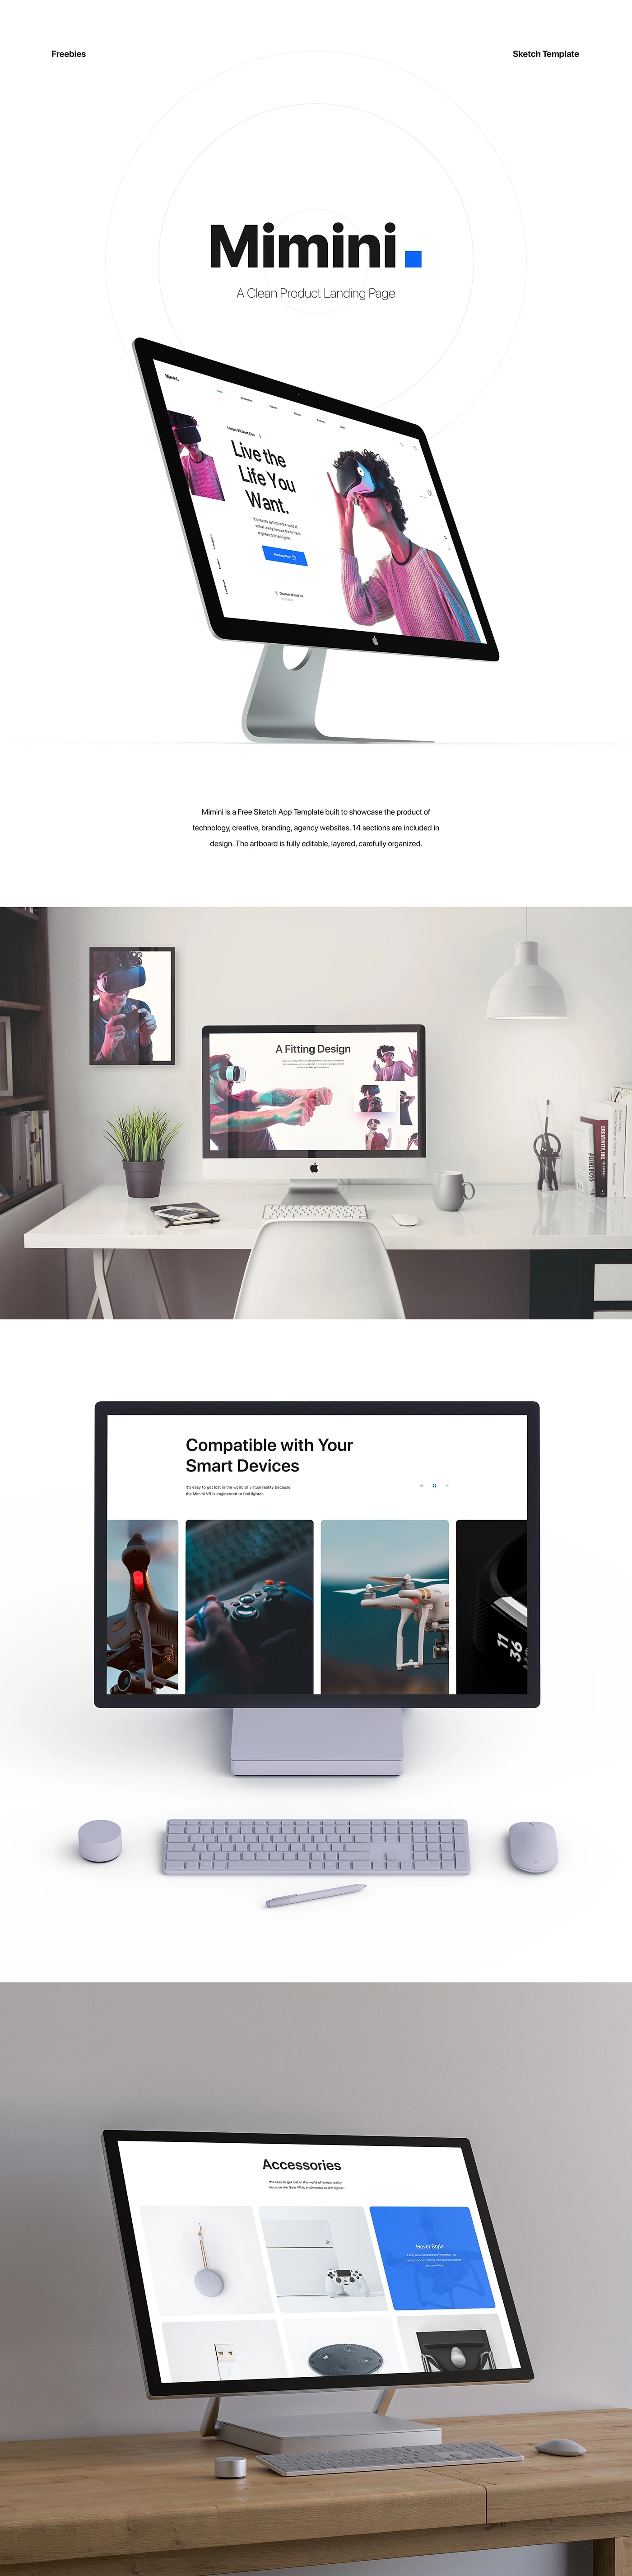 Mimini Free Landing Page - 14 sections are included in design. The artboard is fully editable, layered, carefully organized